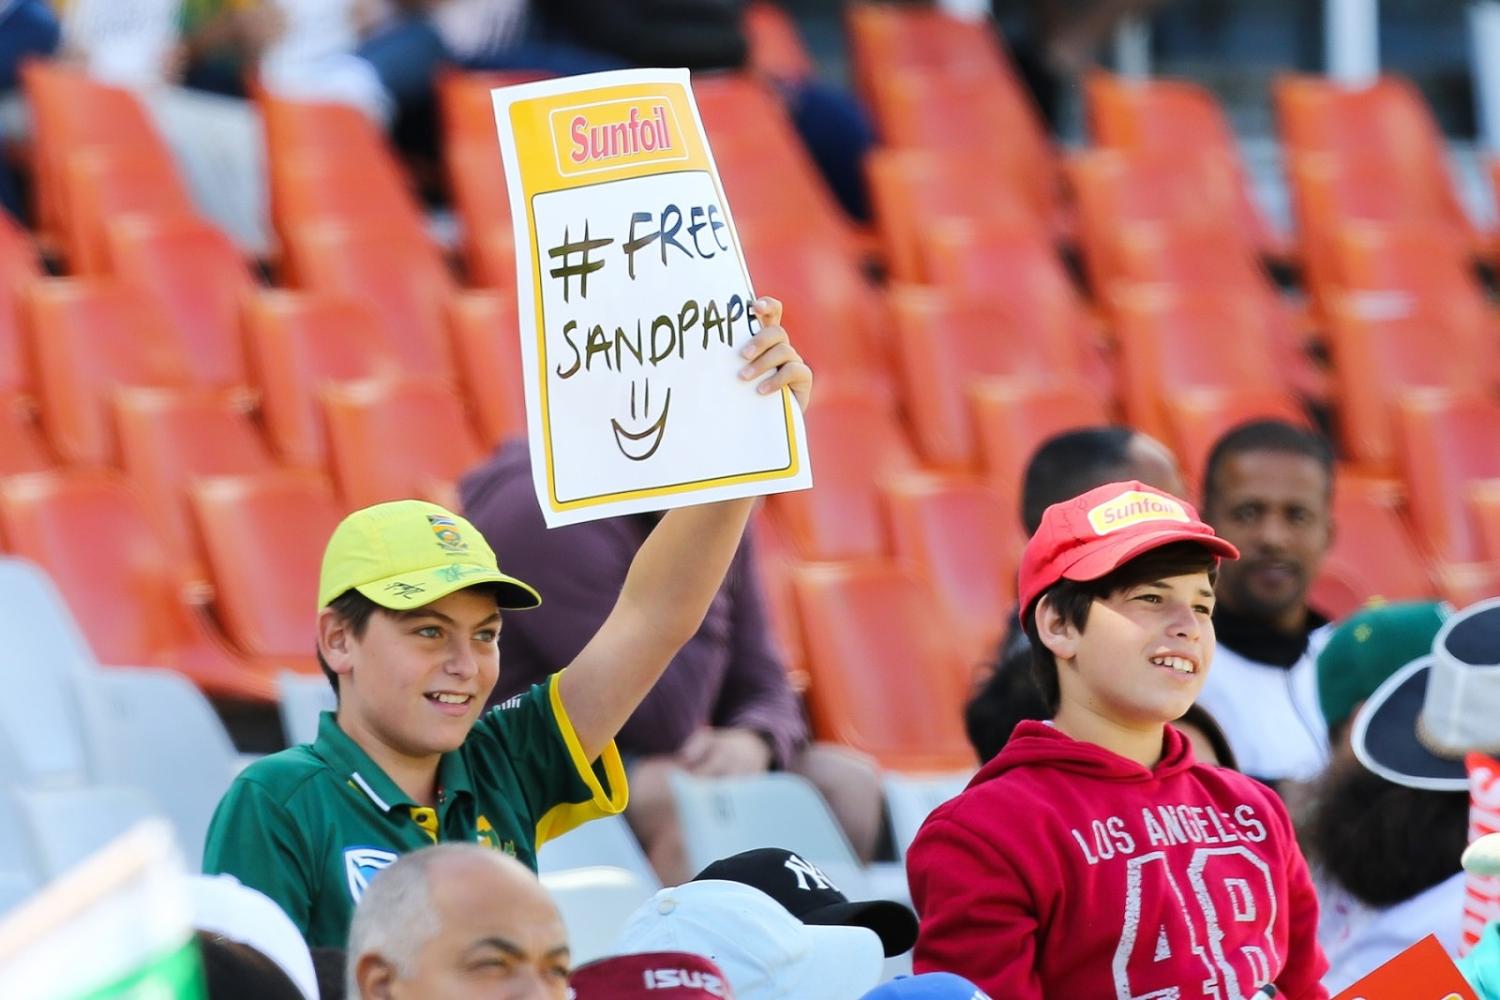 Cricket fans at the Test match between South Africa and Australia, 25 March 2018 in Cape Town, South Africa (EJ Langer/Gallo Images/Getty Images)